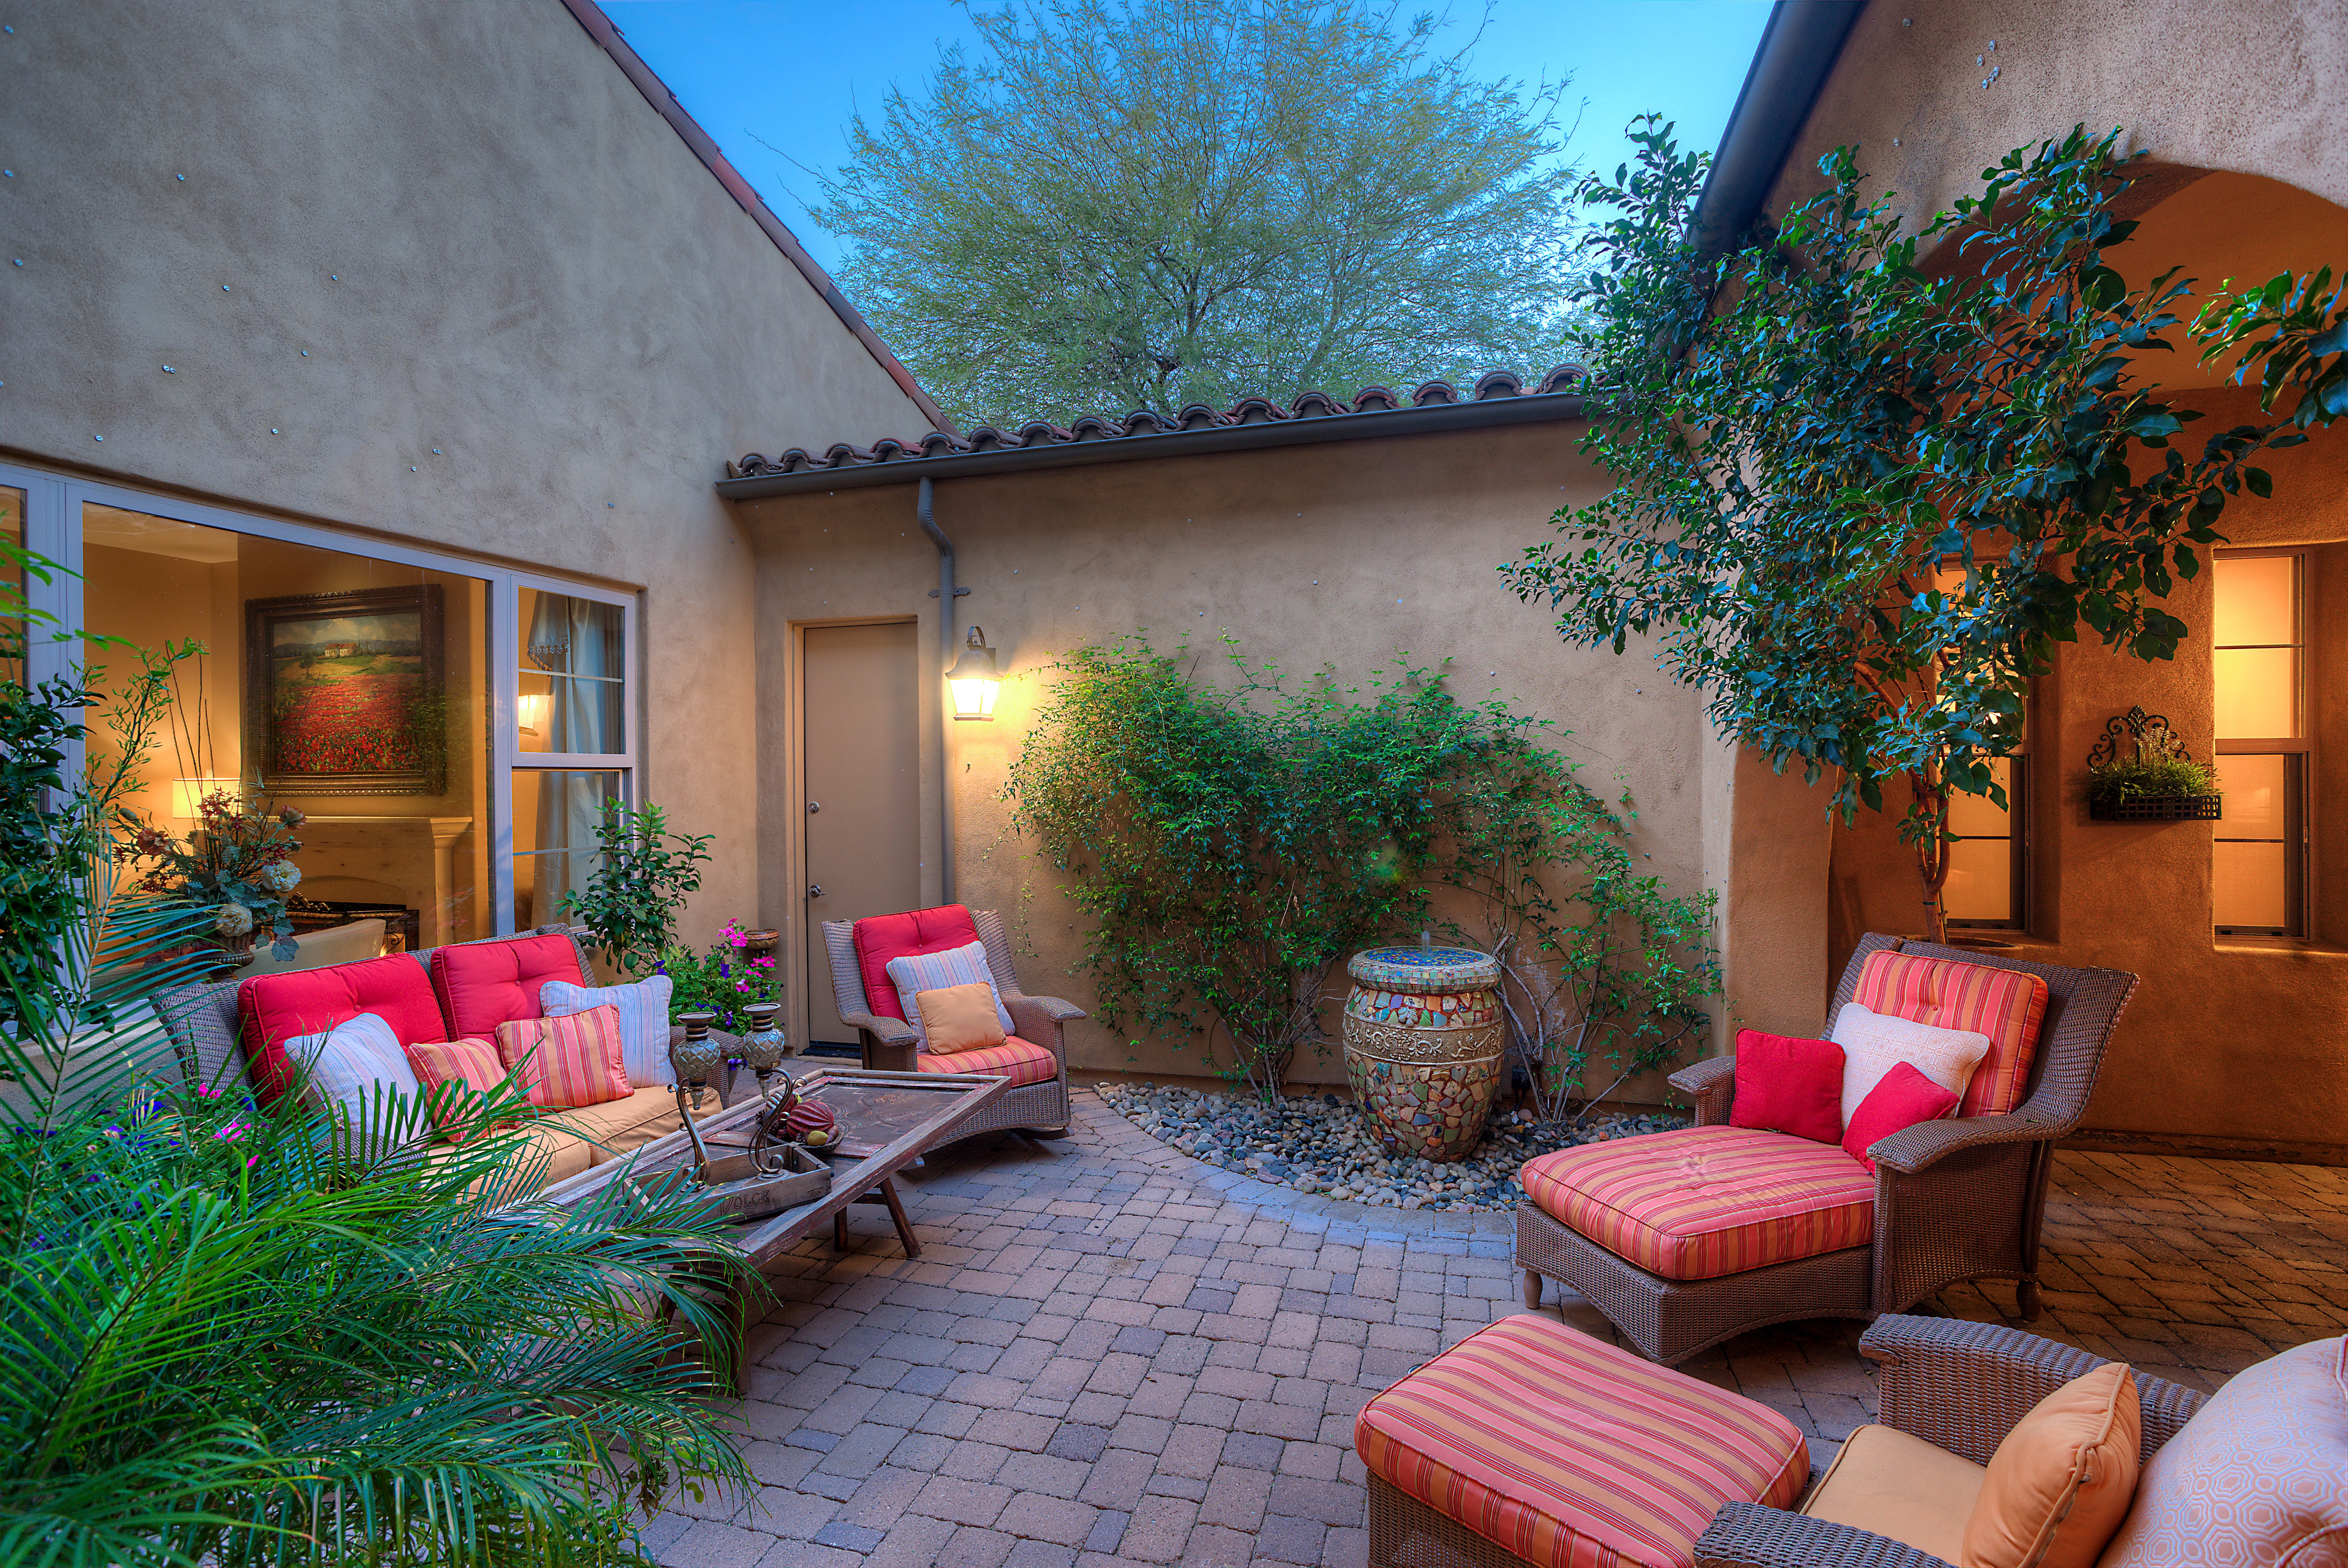 Tranquil inner courtyard at this Scottsdale home for sale in DC Ranch located at 19829 N 97th Pl Scottsdale, AZ 85255 listed by Don Matheson at The Matheson Team